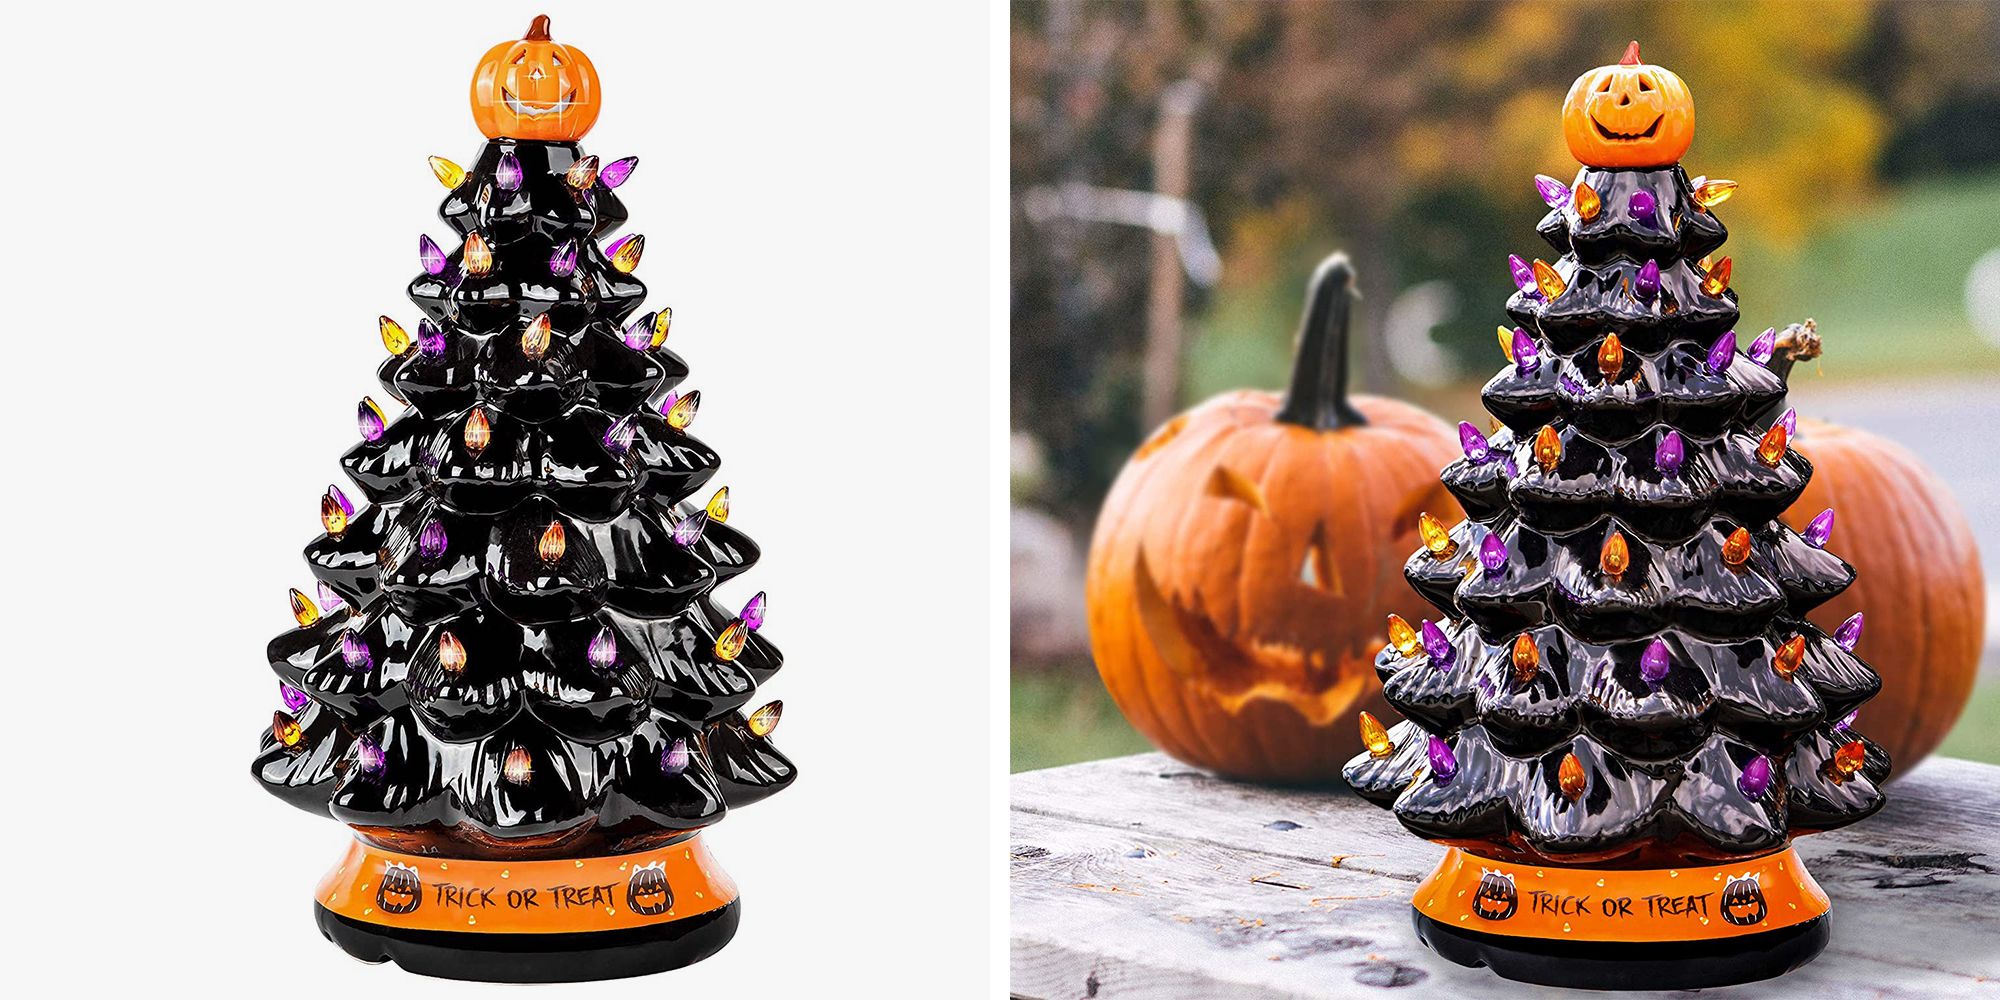 You Can Get a Black Ceramic Tree on Amazon for a Classic Halloween Piece